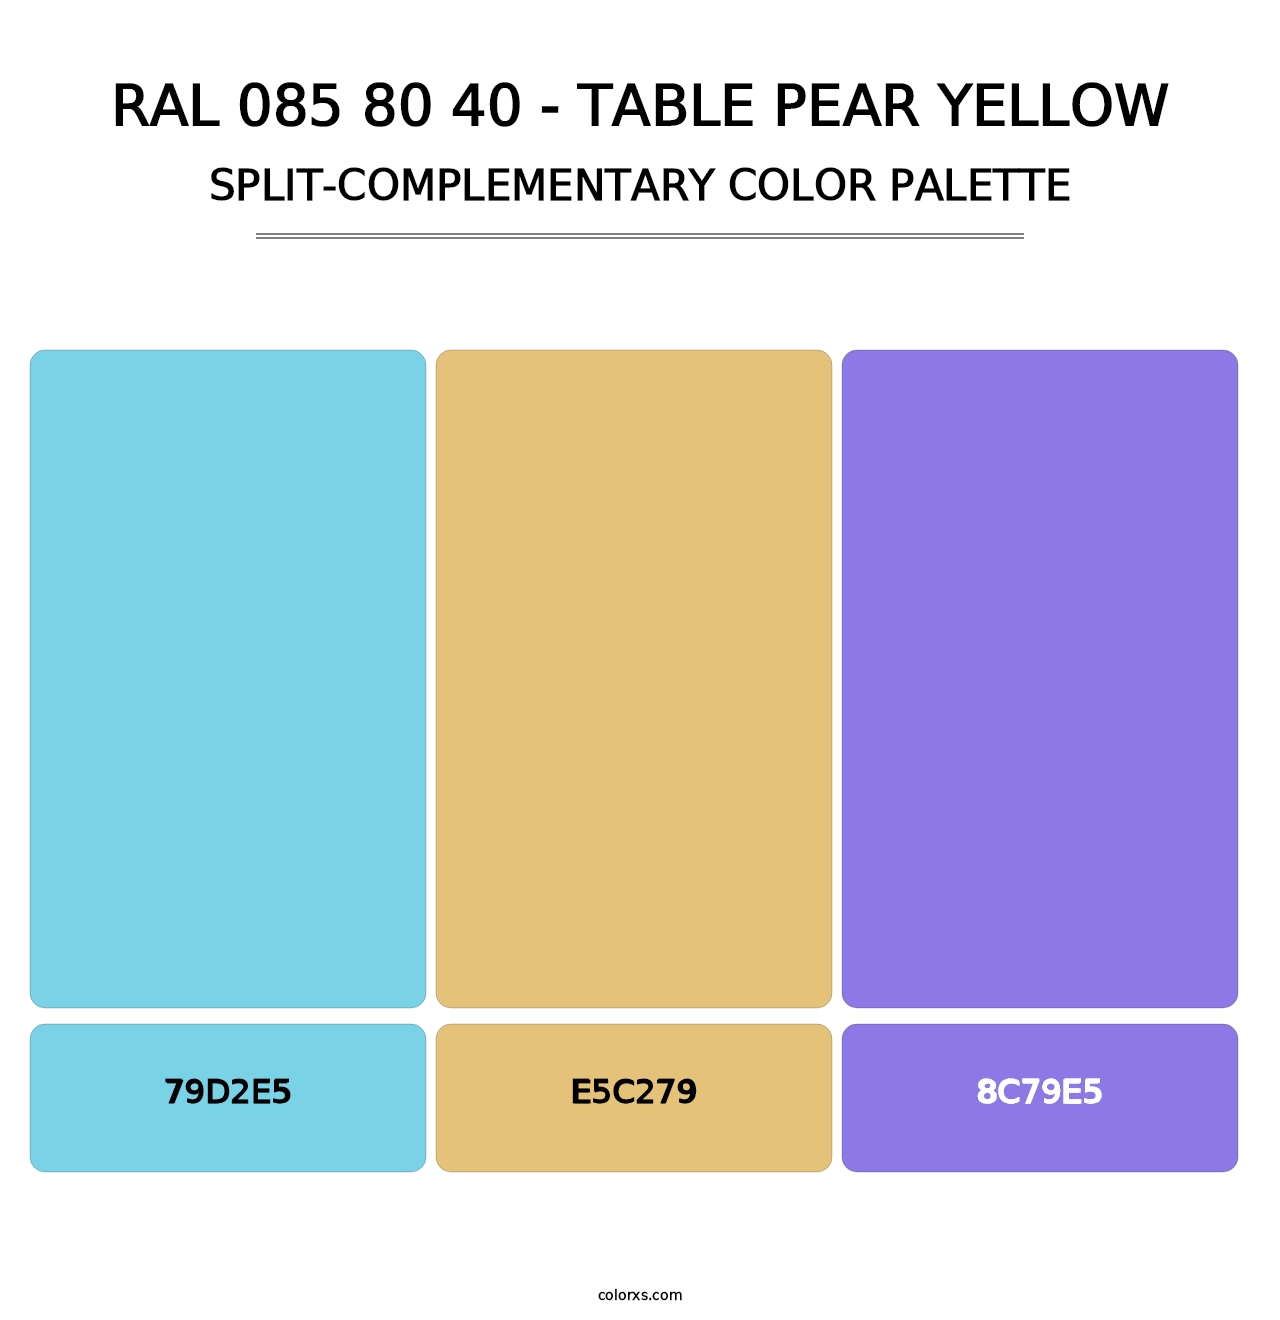 RAL 085 80 40 - Table Pear Yellow - Split-Complementary Color Palette